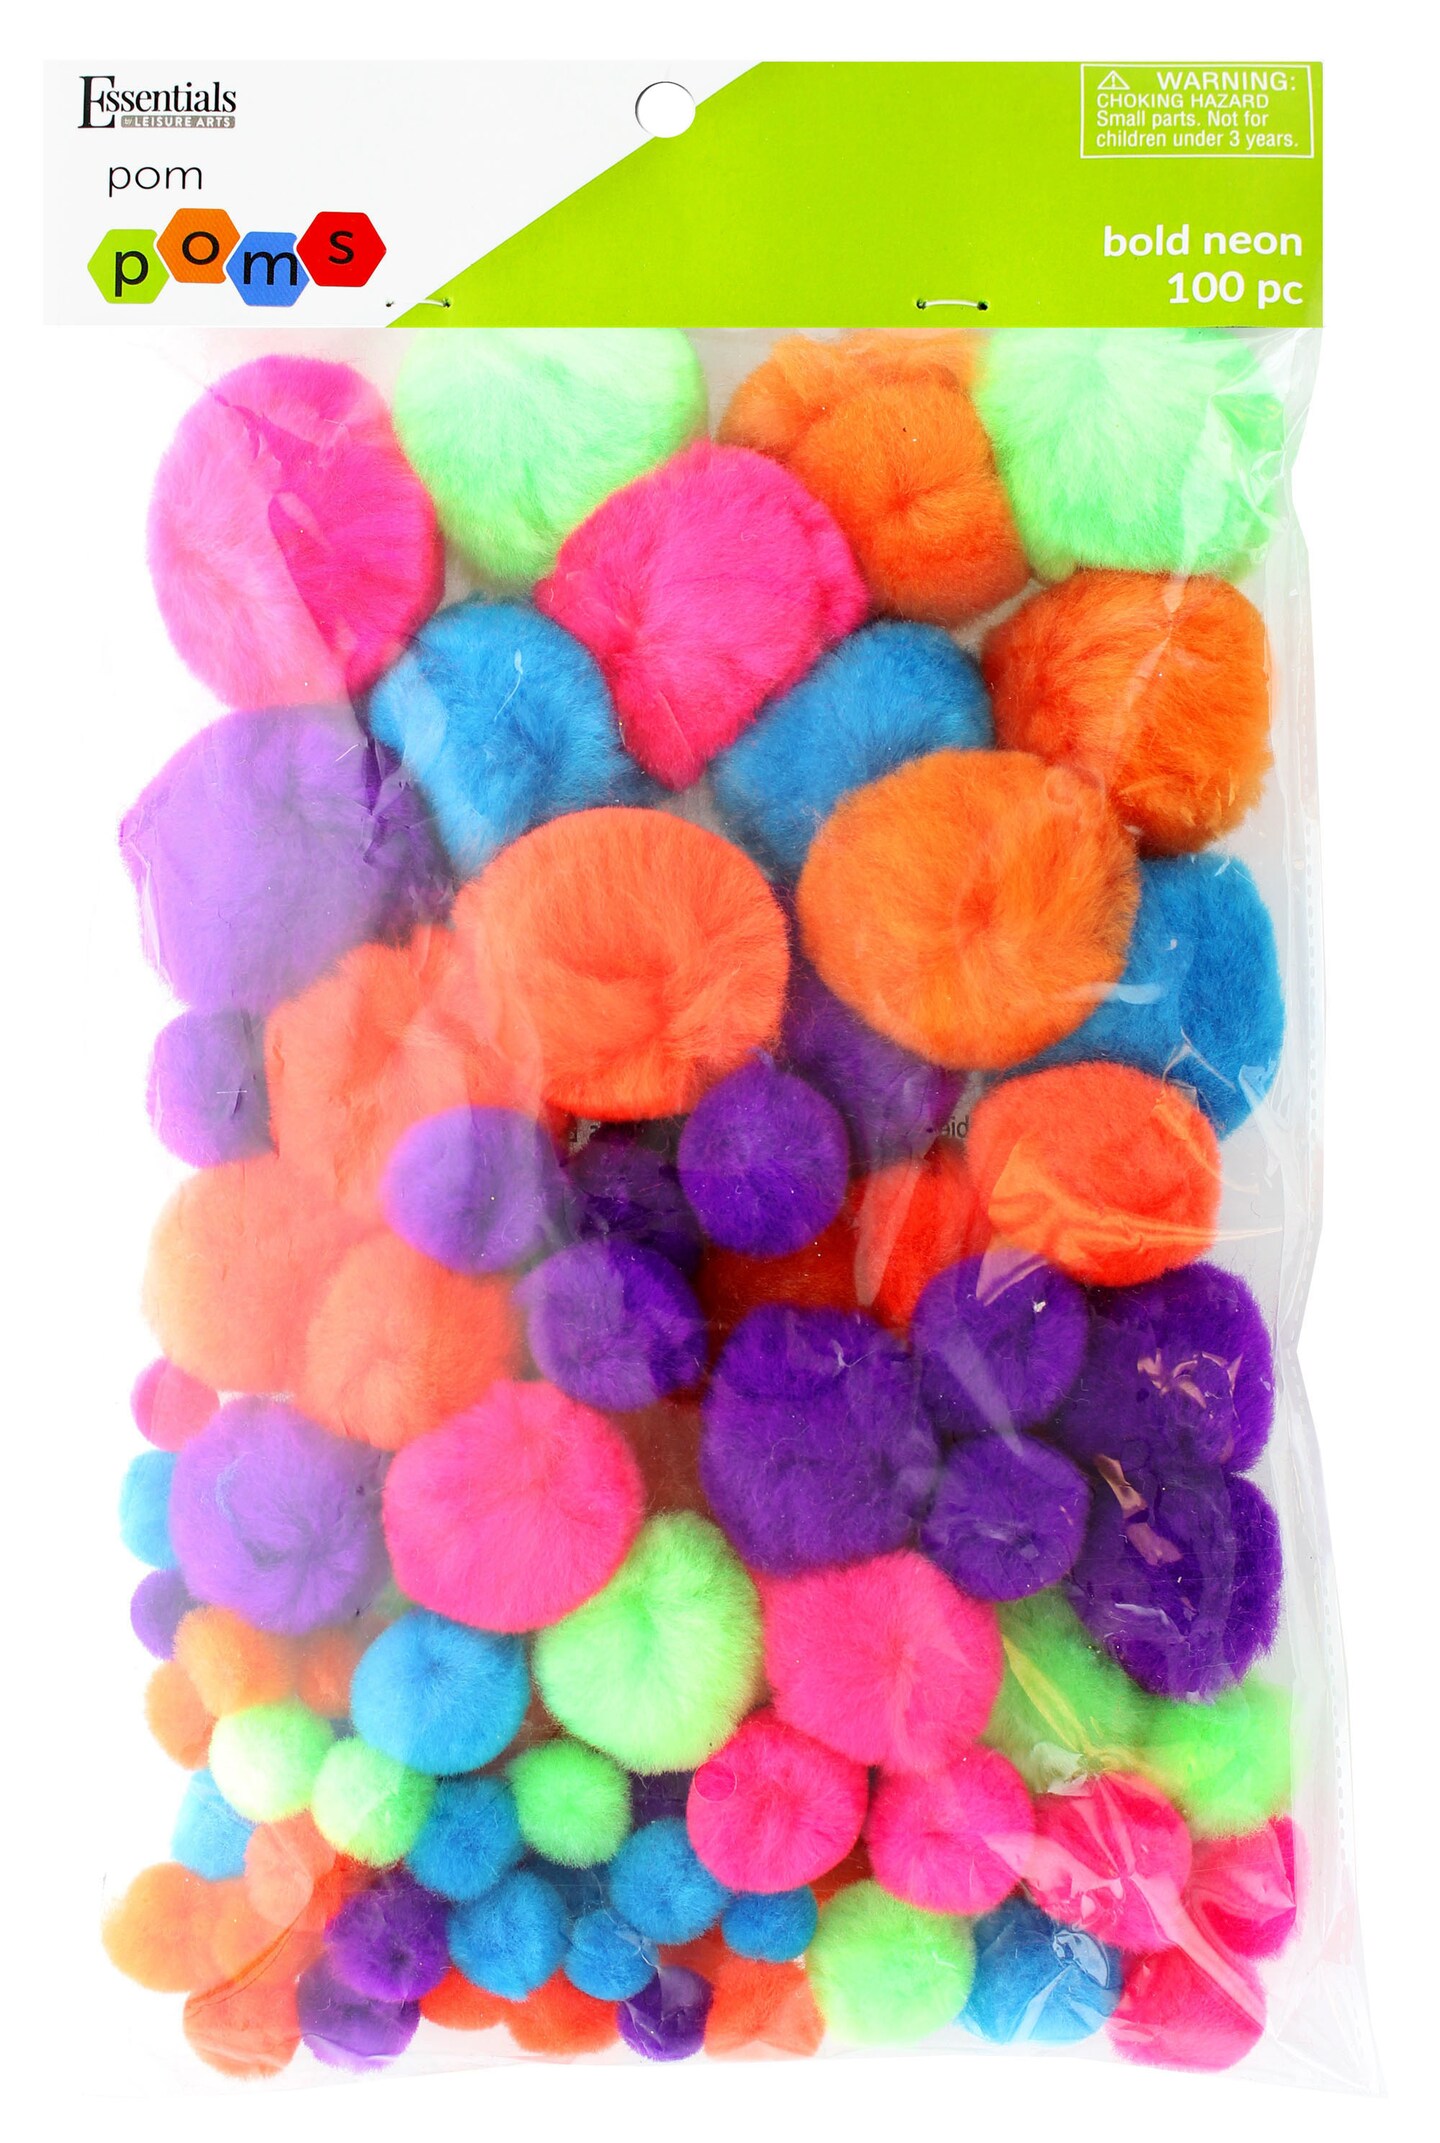 Essentials by Leisure Arts Pom Poms, Bold Neon -Assorted Sizes, 100 Pieces per Pack